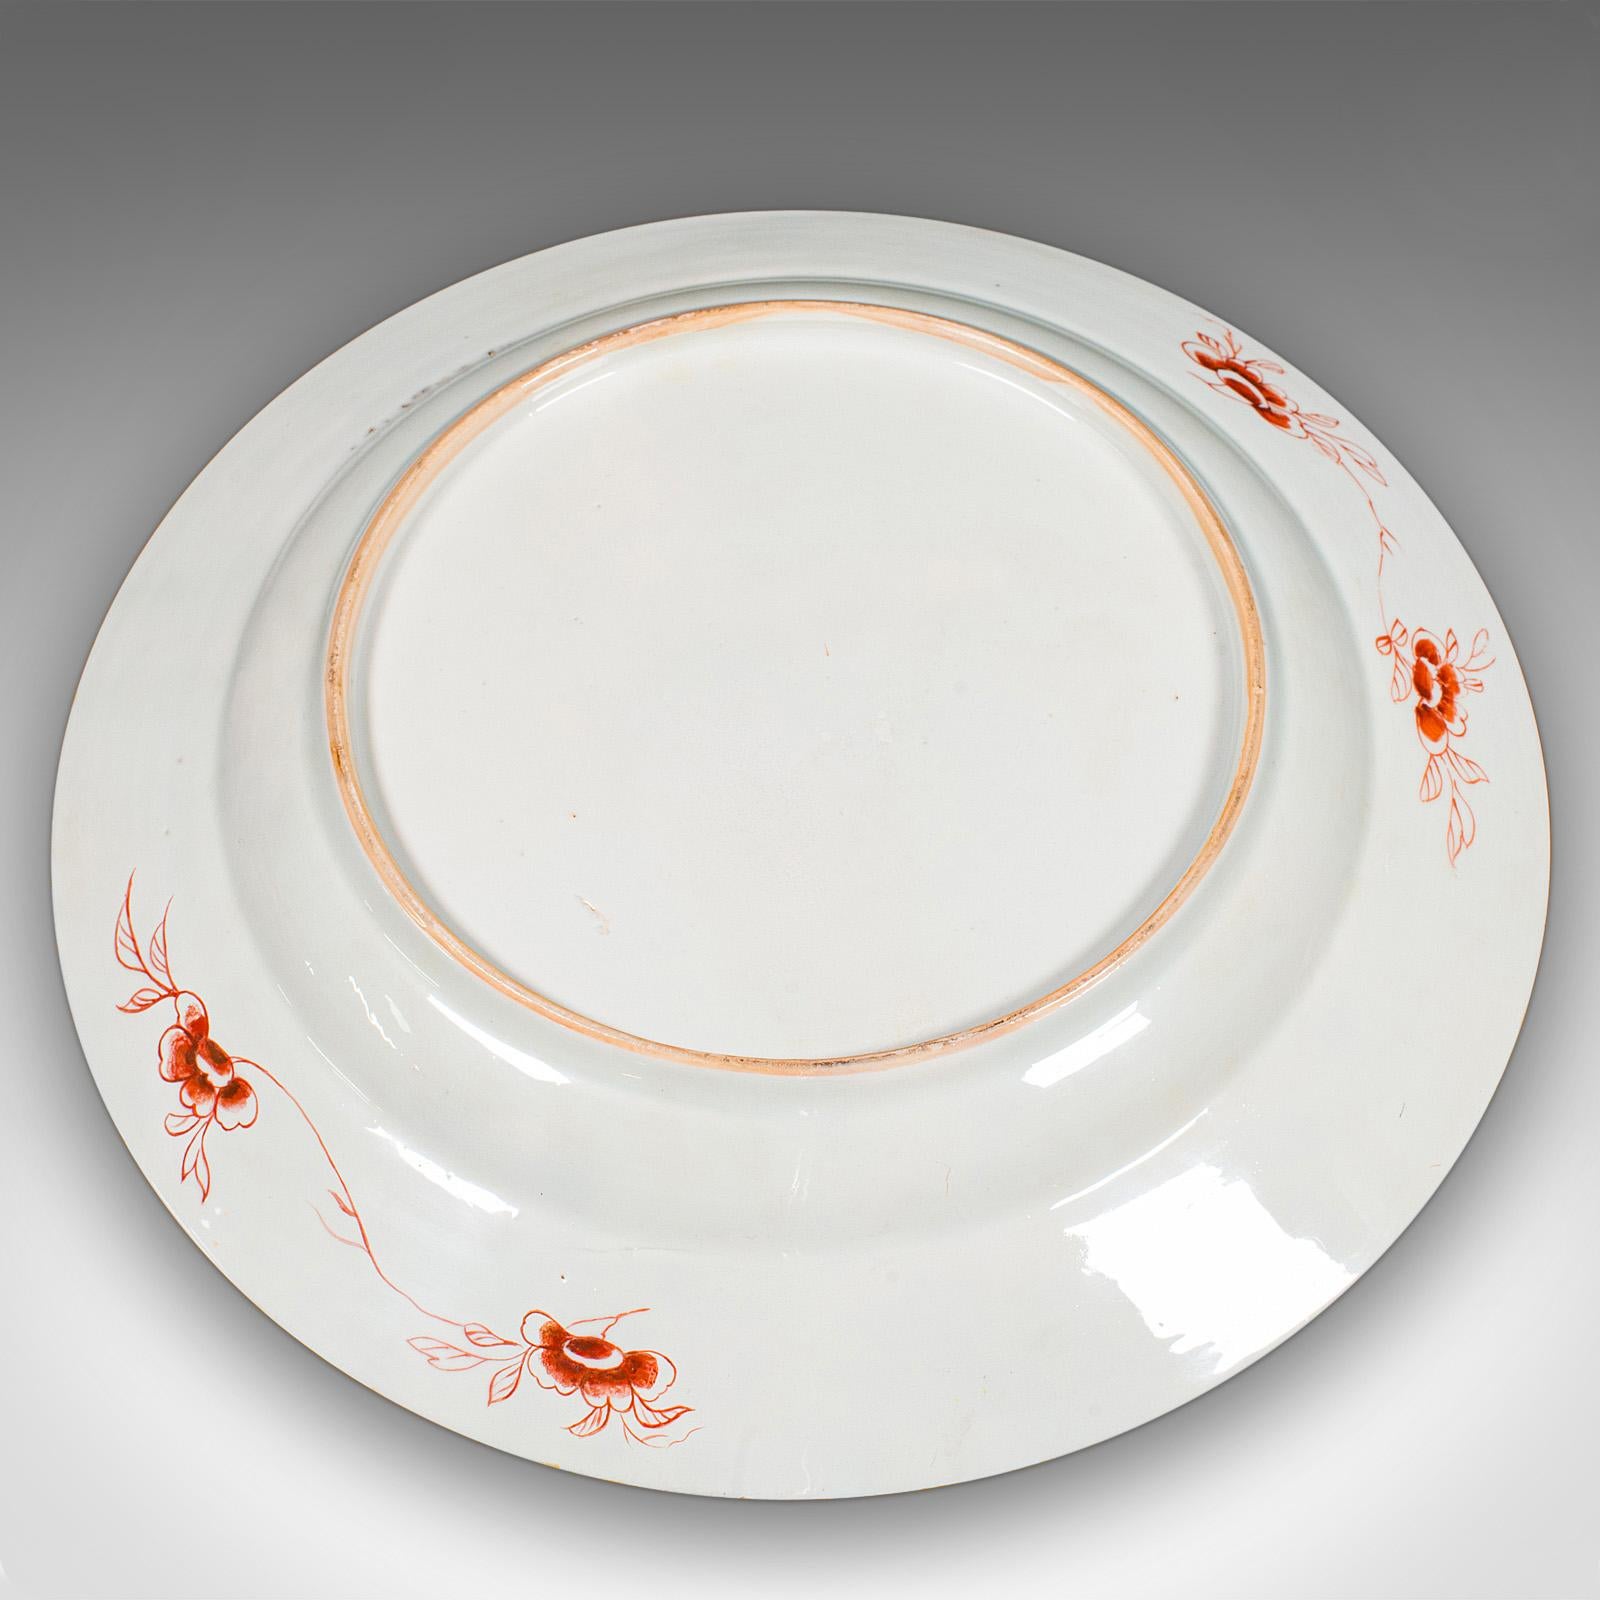 Large Antique Decorative Charger, Japanese, Ceramic, Serving Plate, Circa 1920 For Sale 3